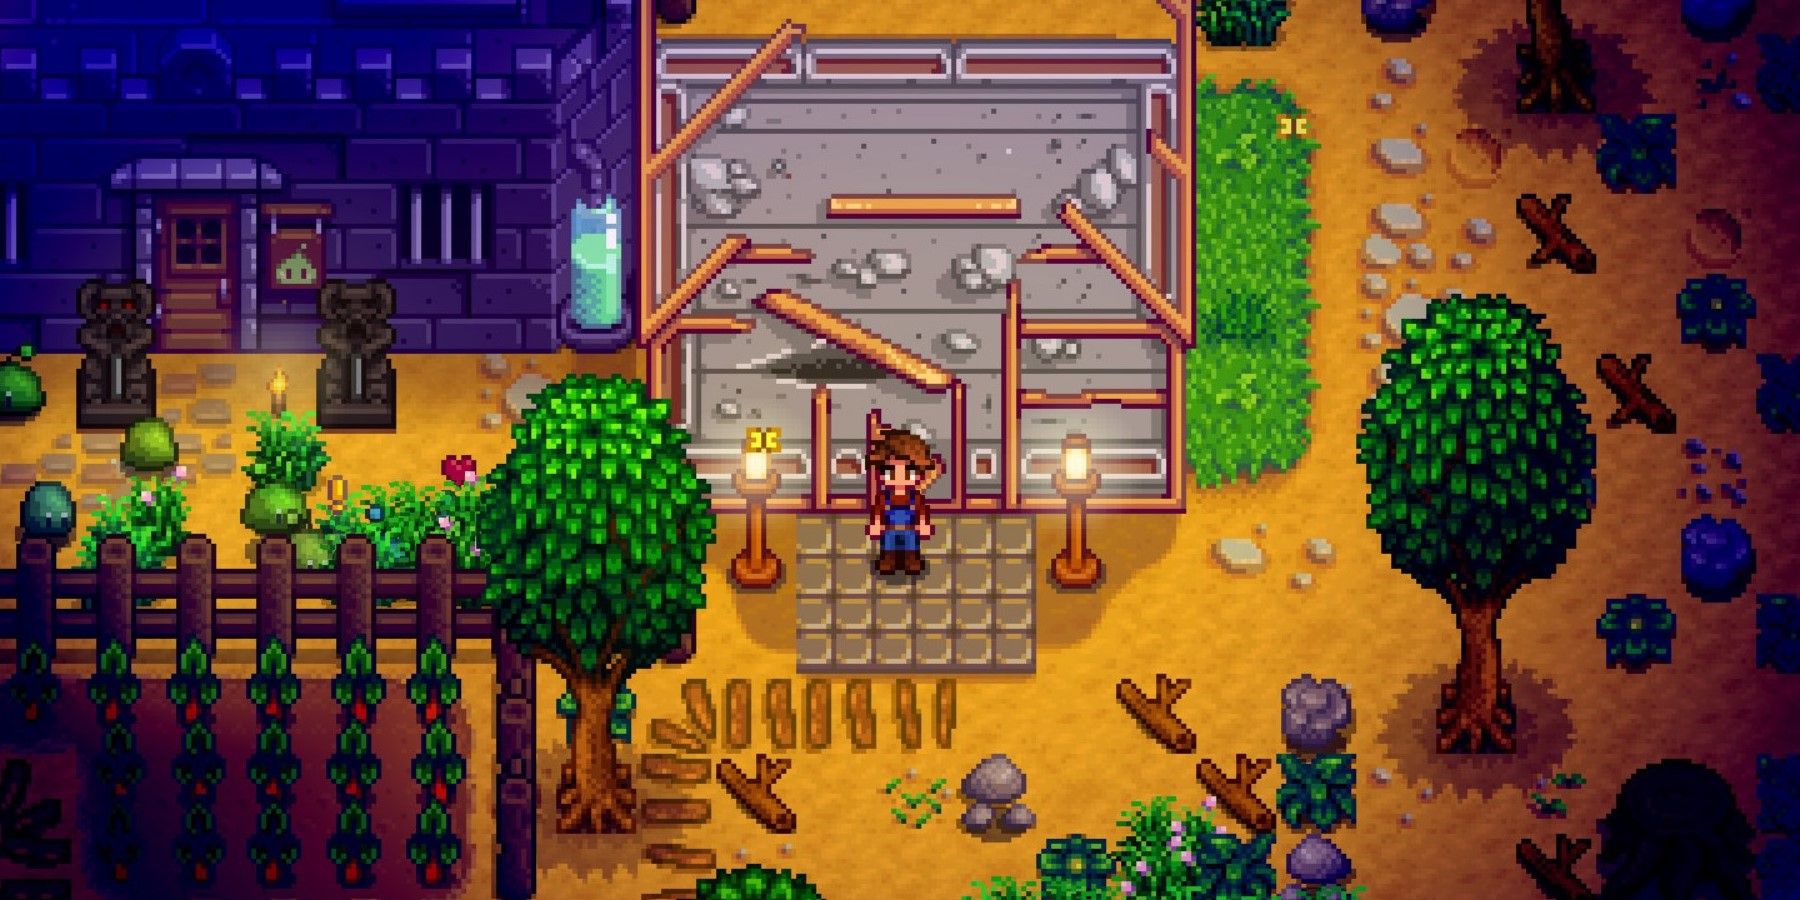 Stardew Valley Player Creates Impressive Plant-Themed Room in the Game